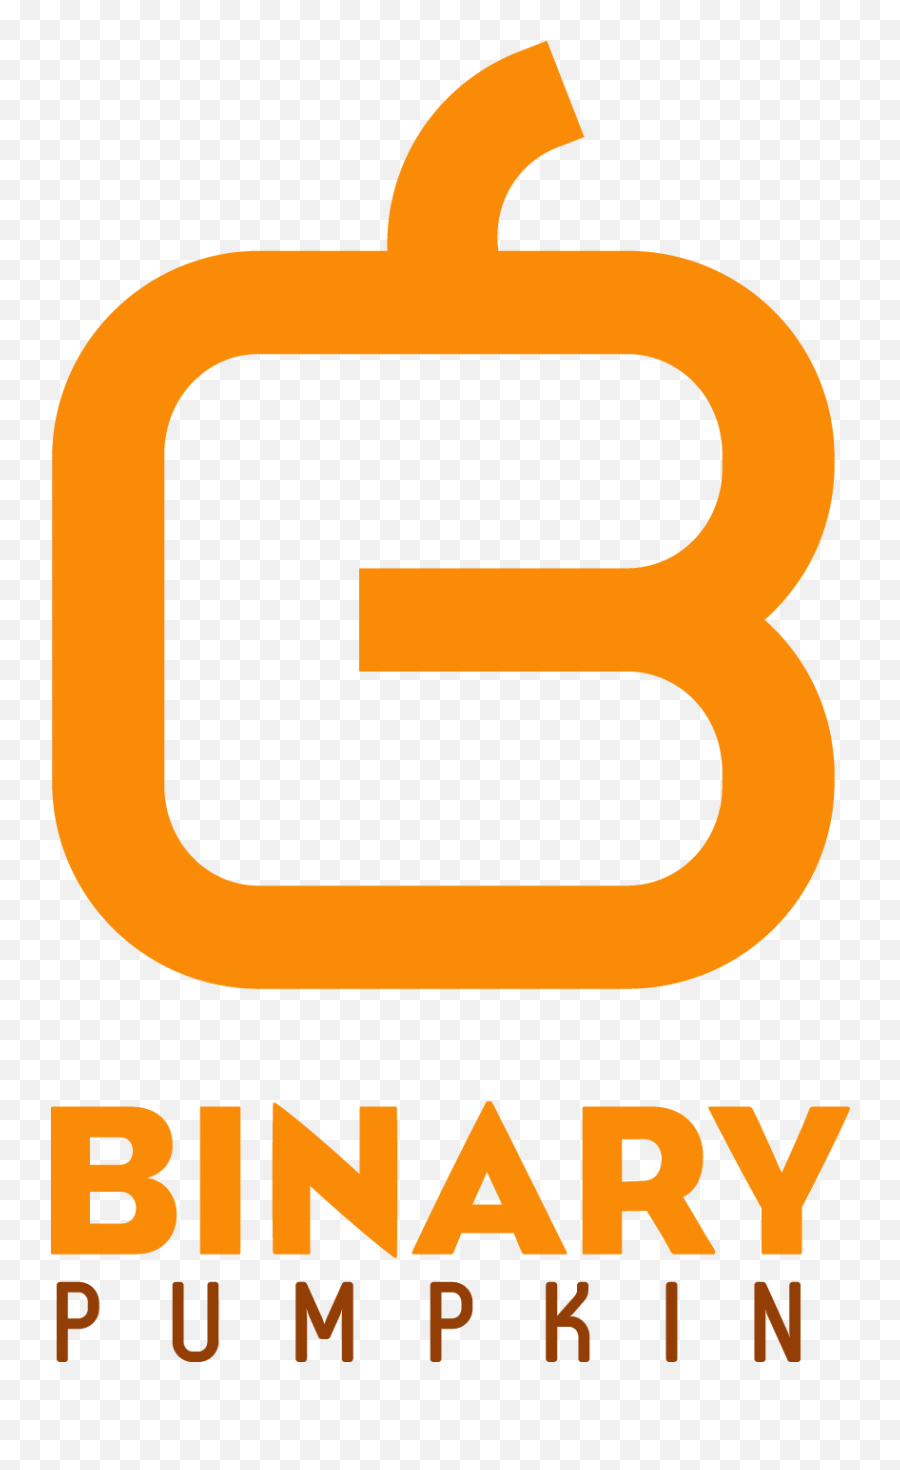 New Company New Game - Binary Pumpkin Introduces Pumpkin Binary Pumpkin Emoji,Pumkin Emoticon For Facebook